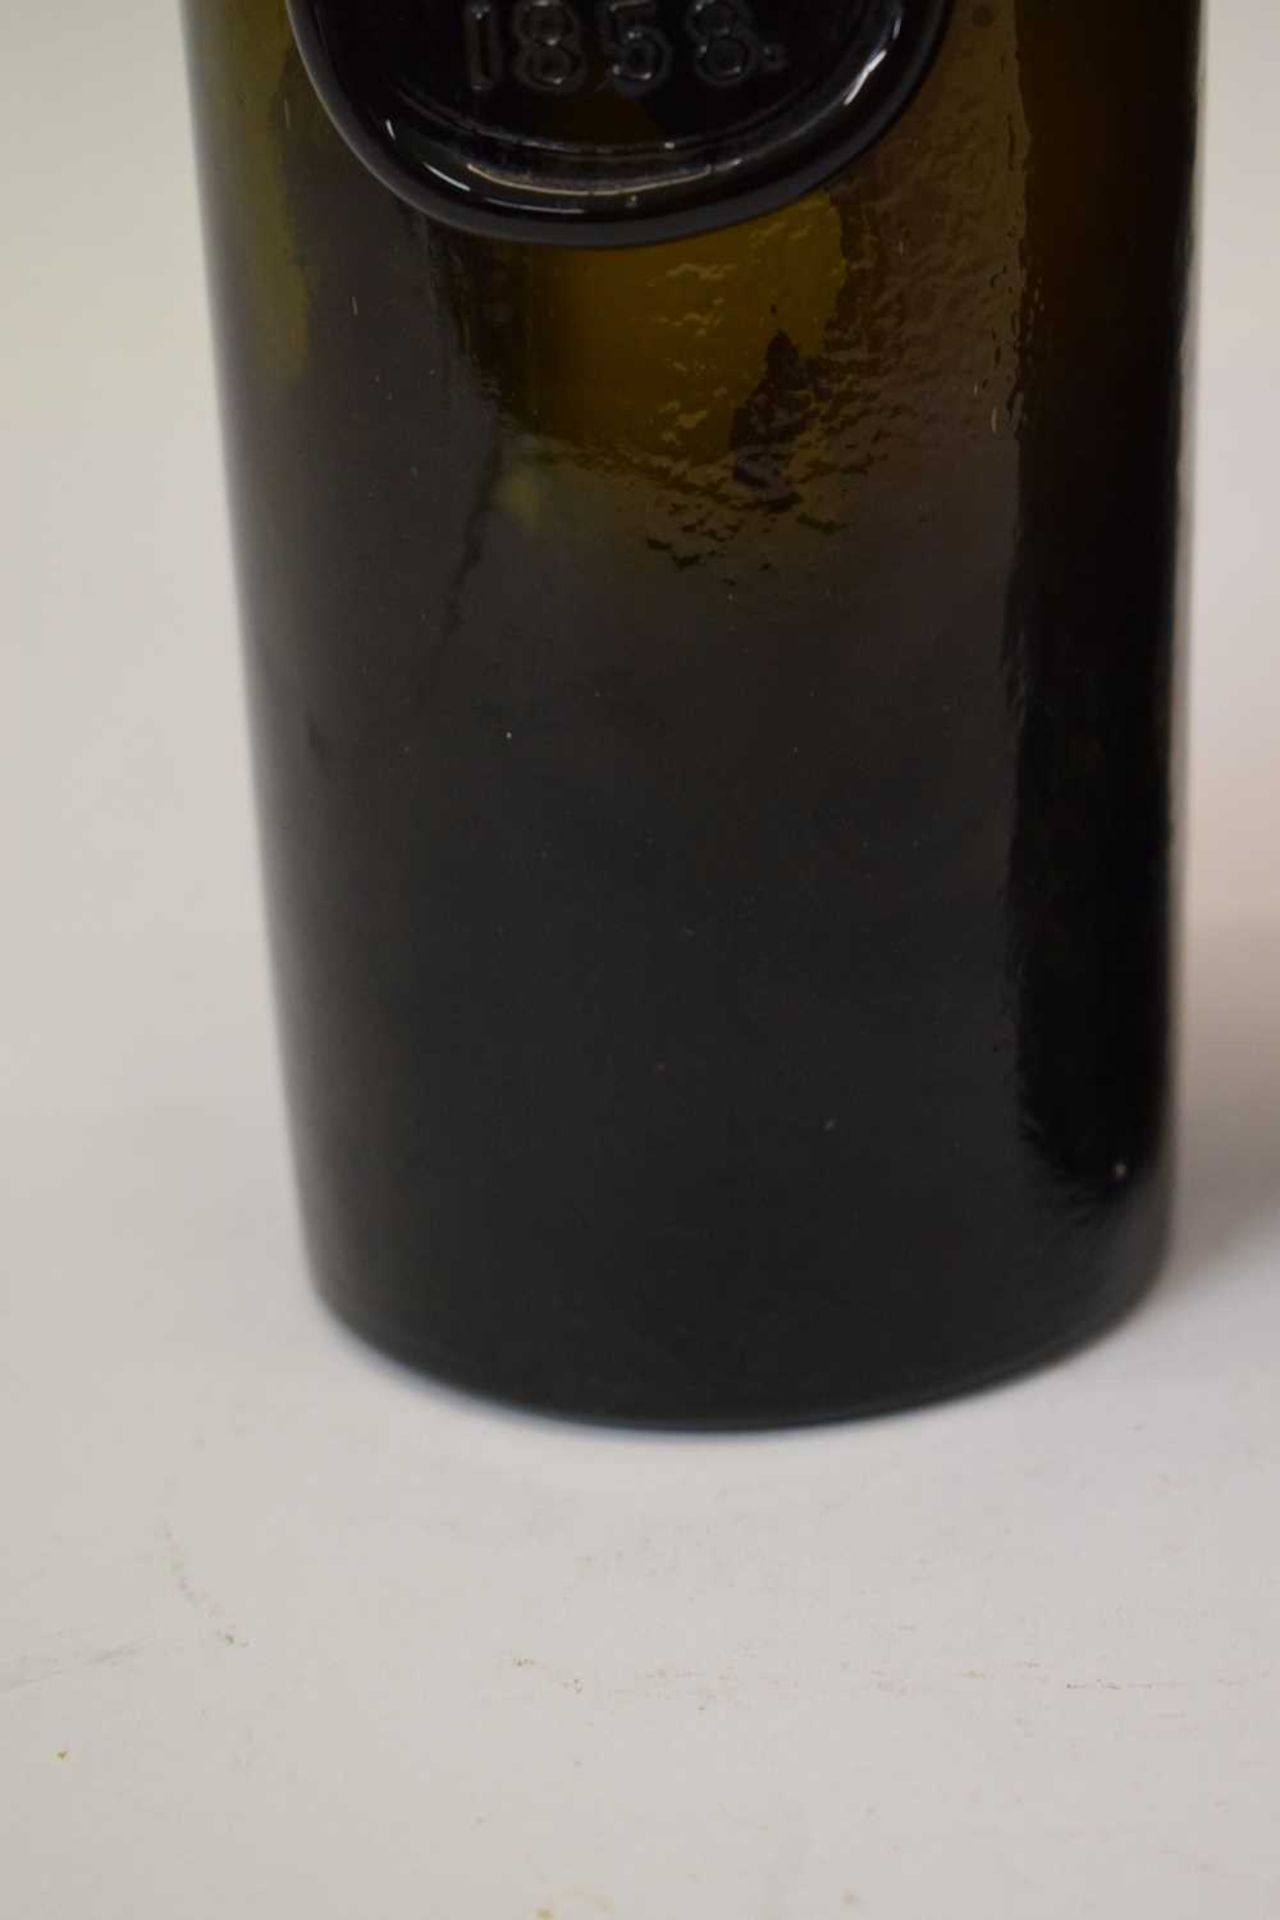 Mid 19th century seal-type Utility bottle - Image 2 of 20